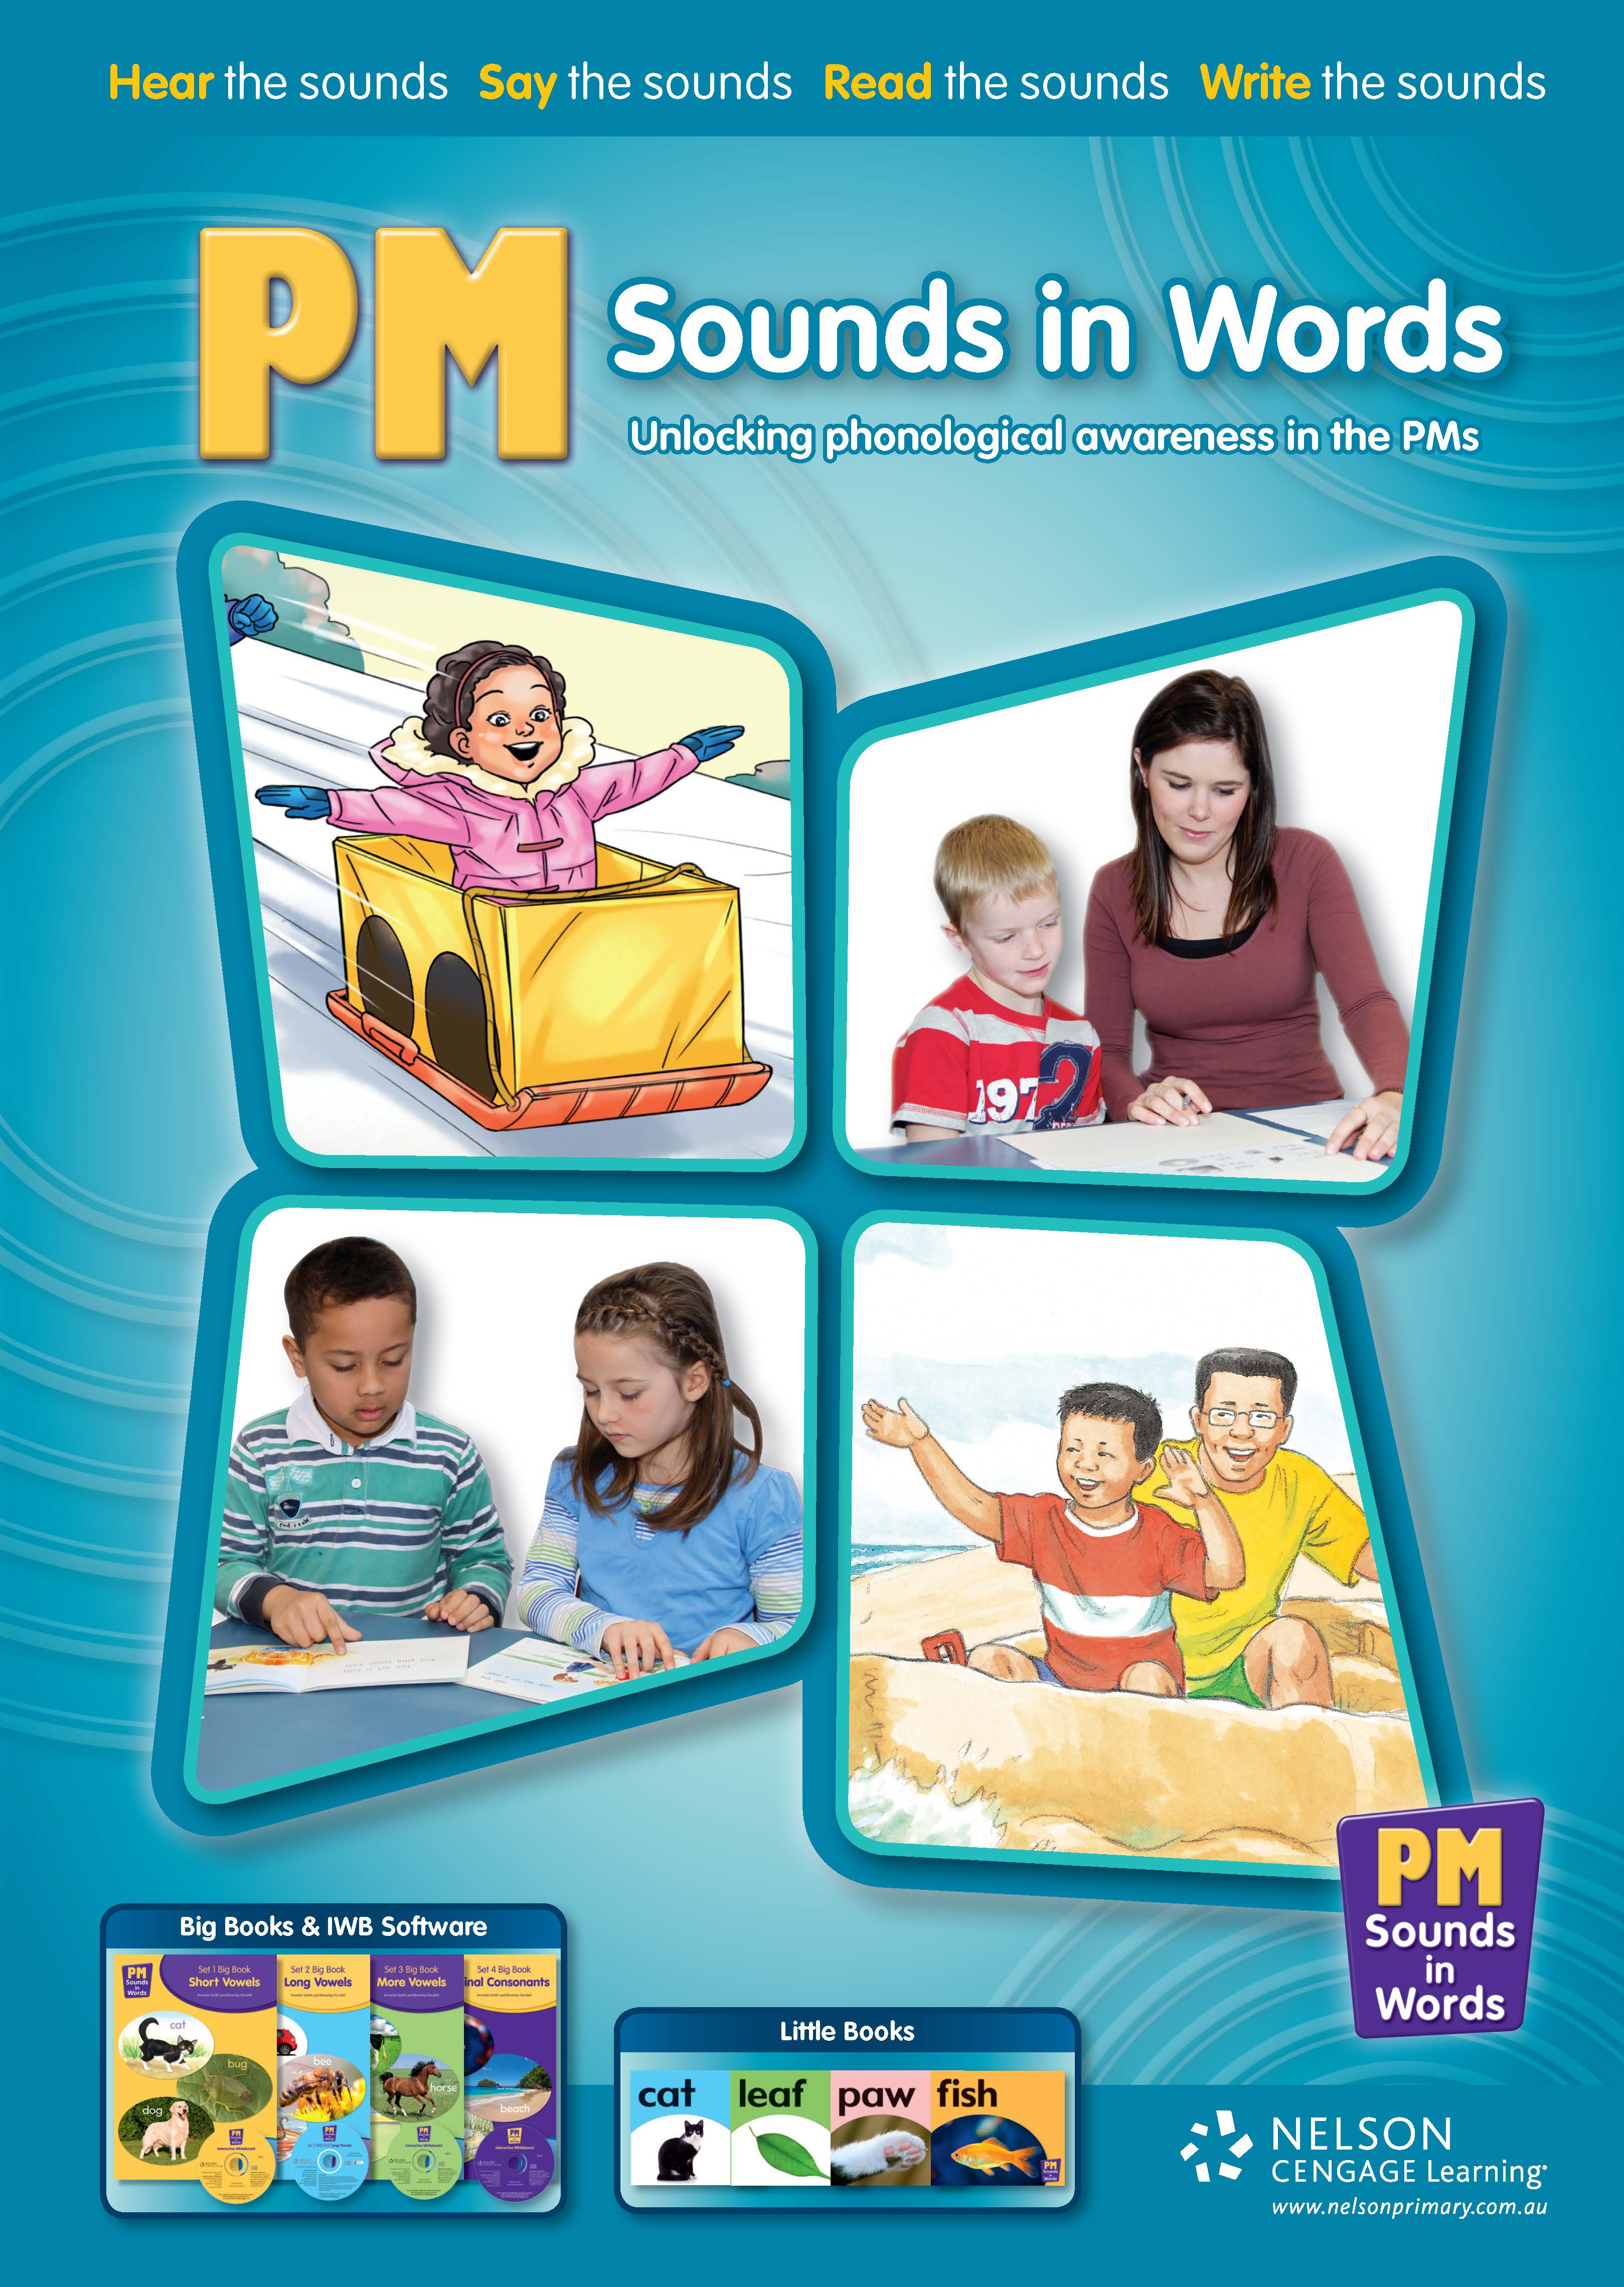 PM Sounds in Words brochure